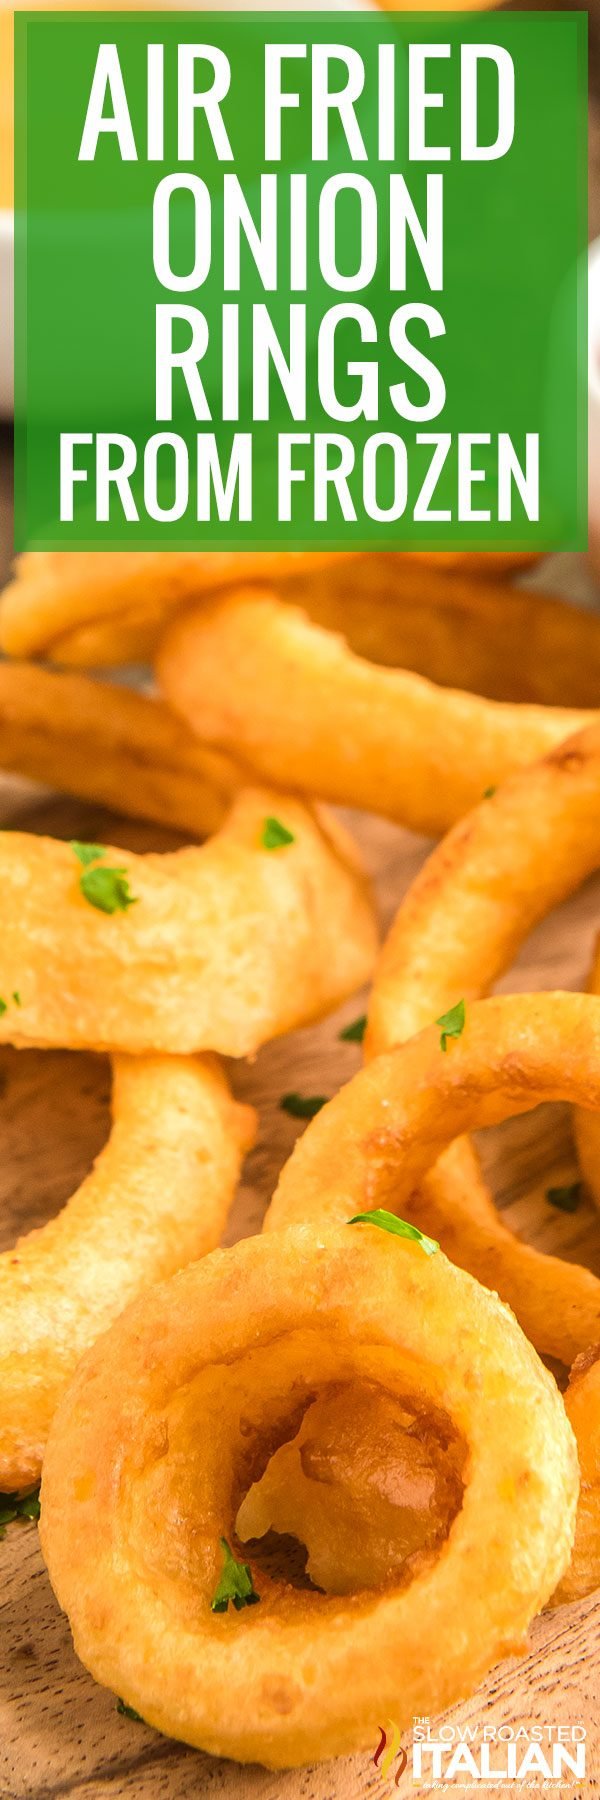 Air Fried Onion Rings (From Frozen)